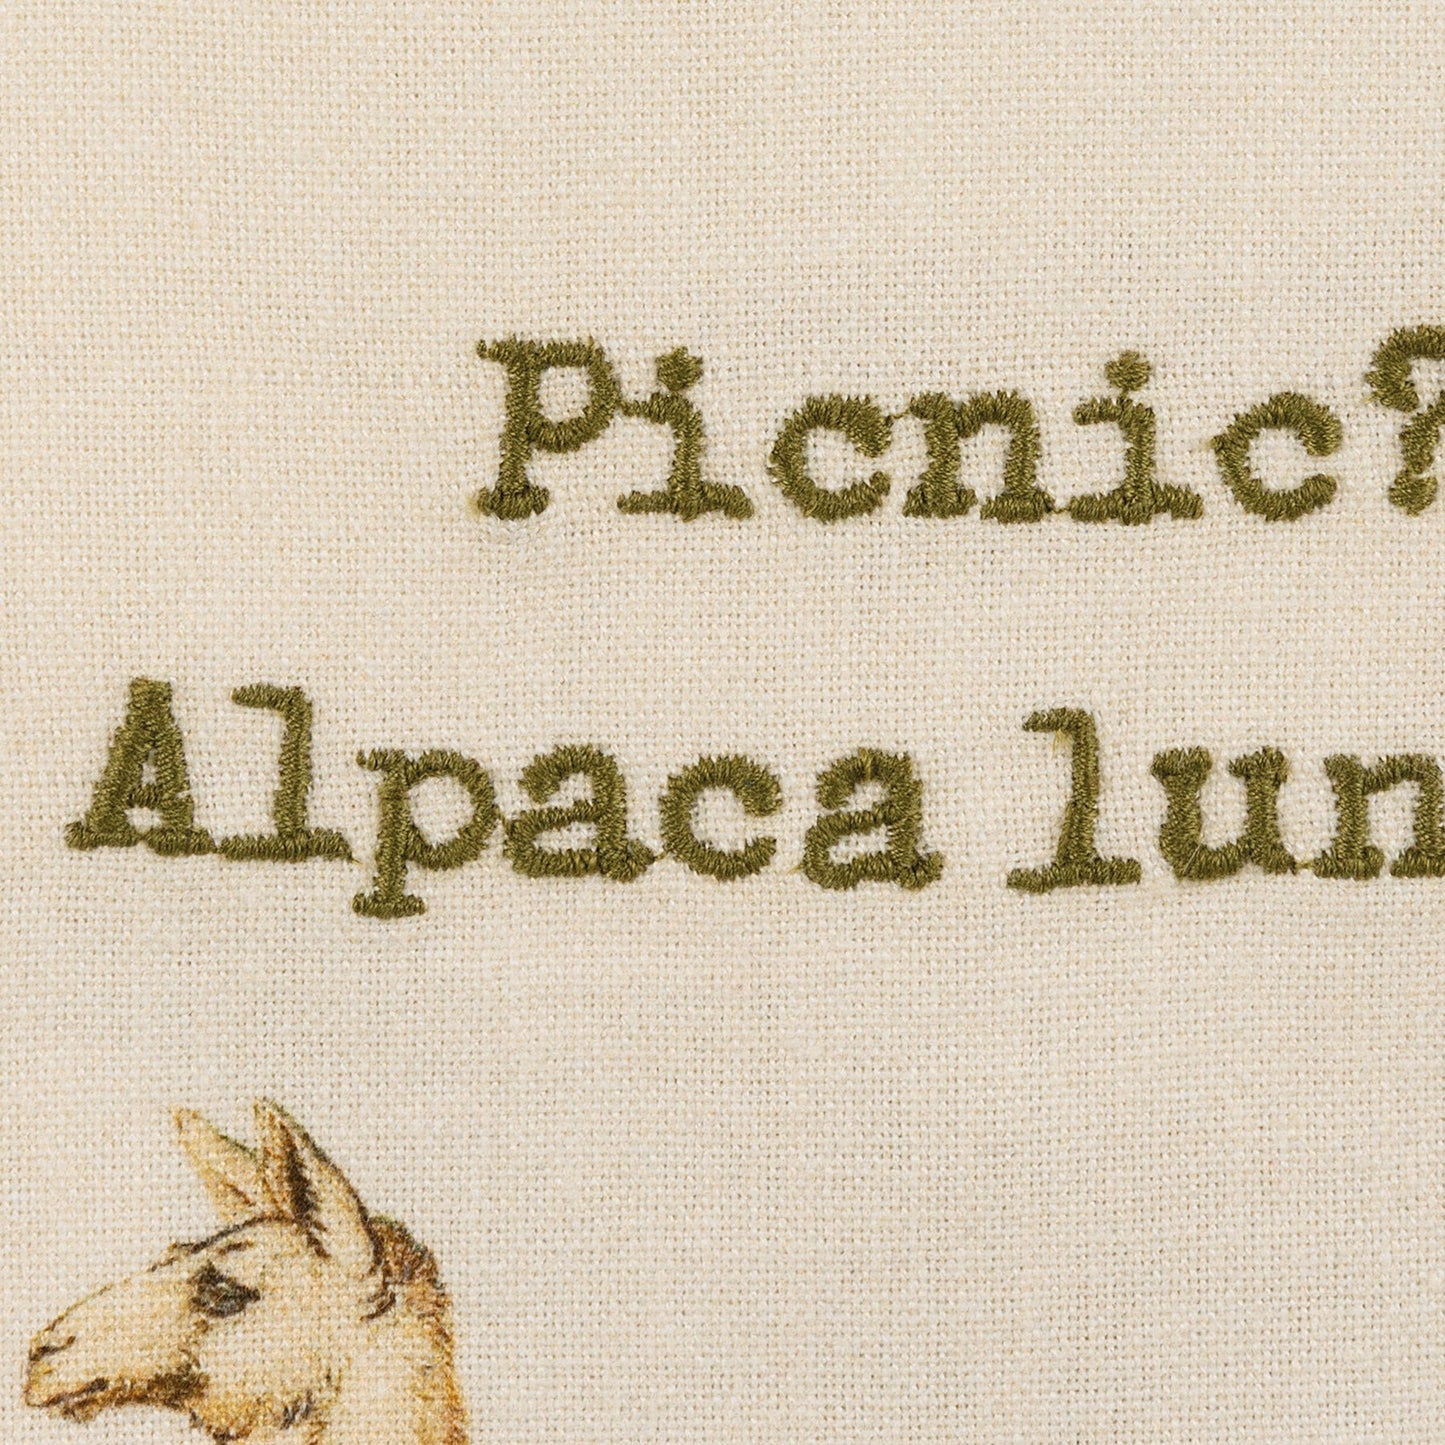 Picnic? Alpaca Our Lunch Dish Cloth Towel | Cotten Linen Novelty Tea Towel | Embroidered Text | 18" x 28"